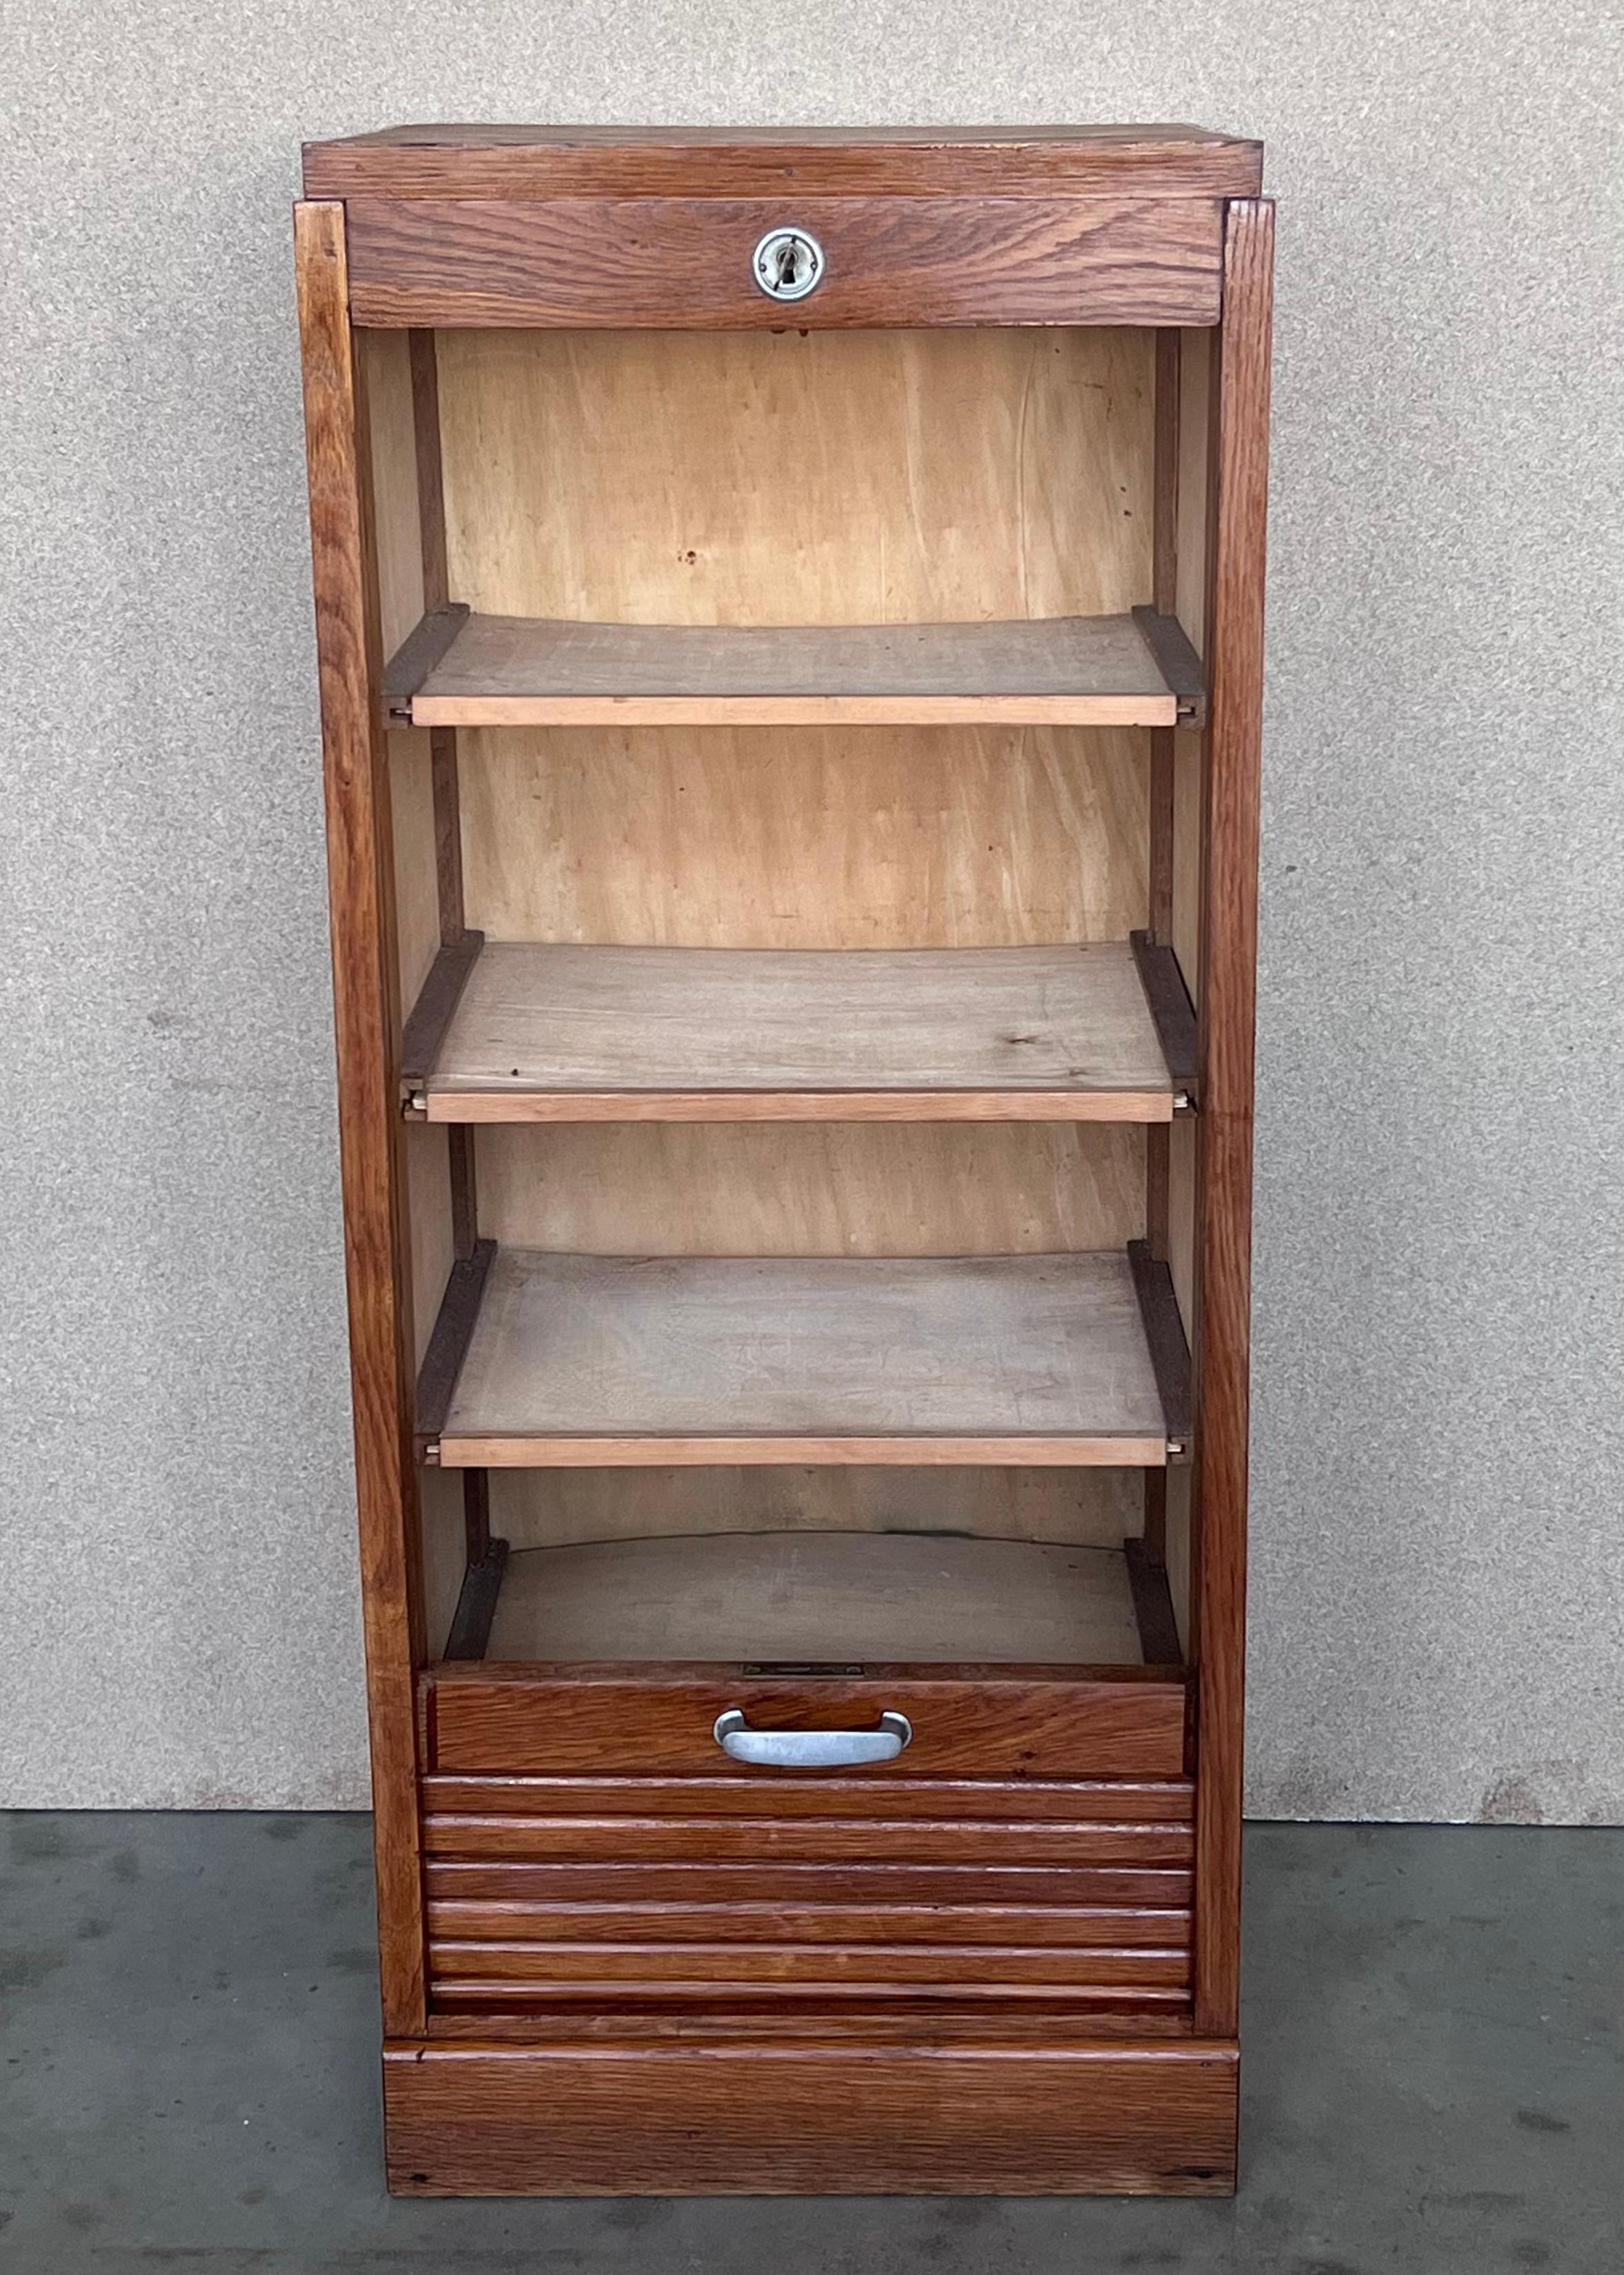 Early 20th Century Filing Cabinet with One Roller Louver Door & Five Shelves In Good Condition For Sale In Miami, FL